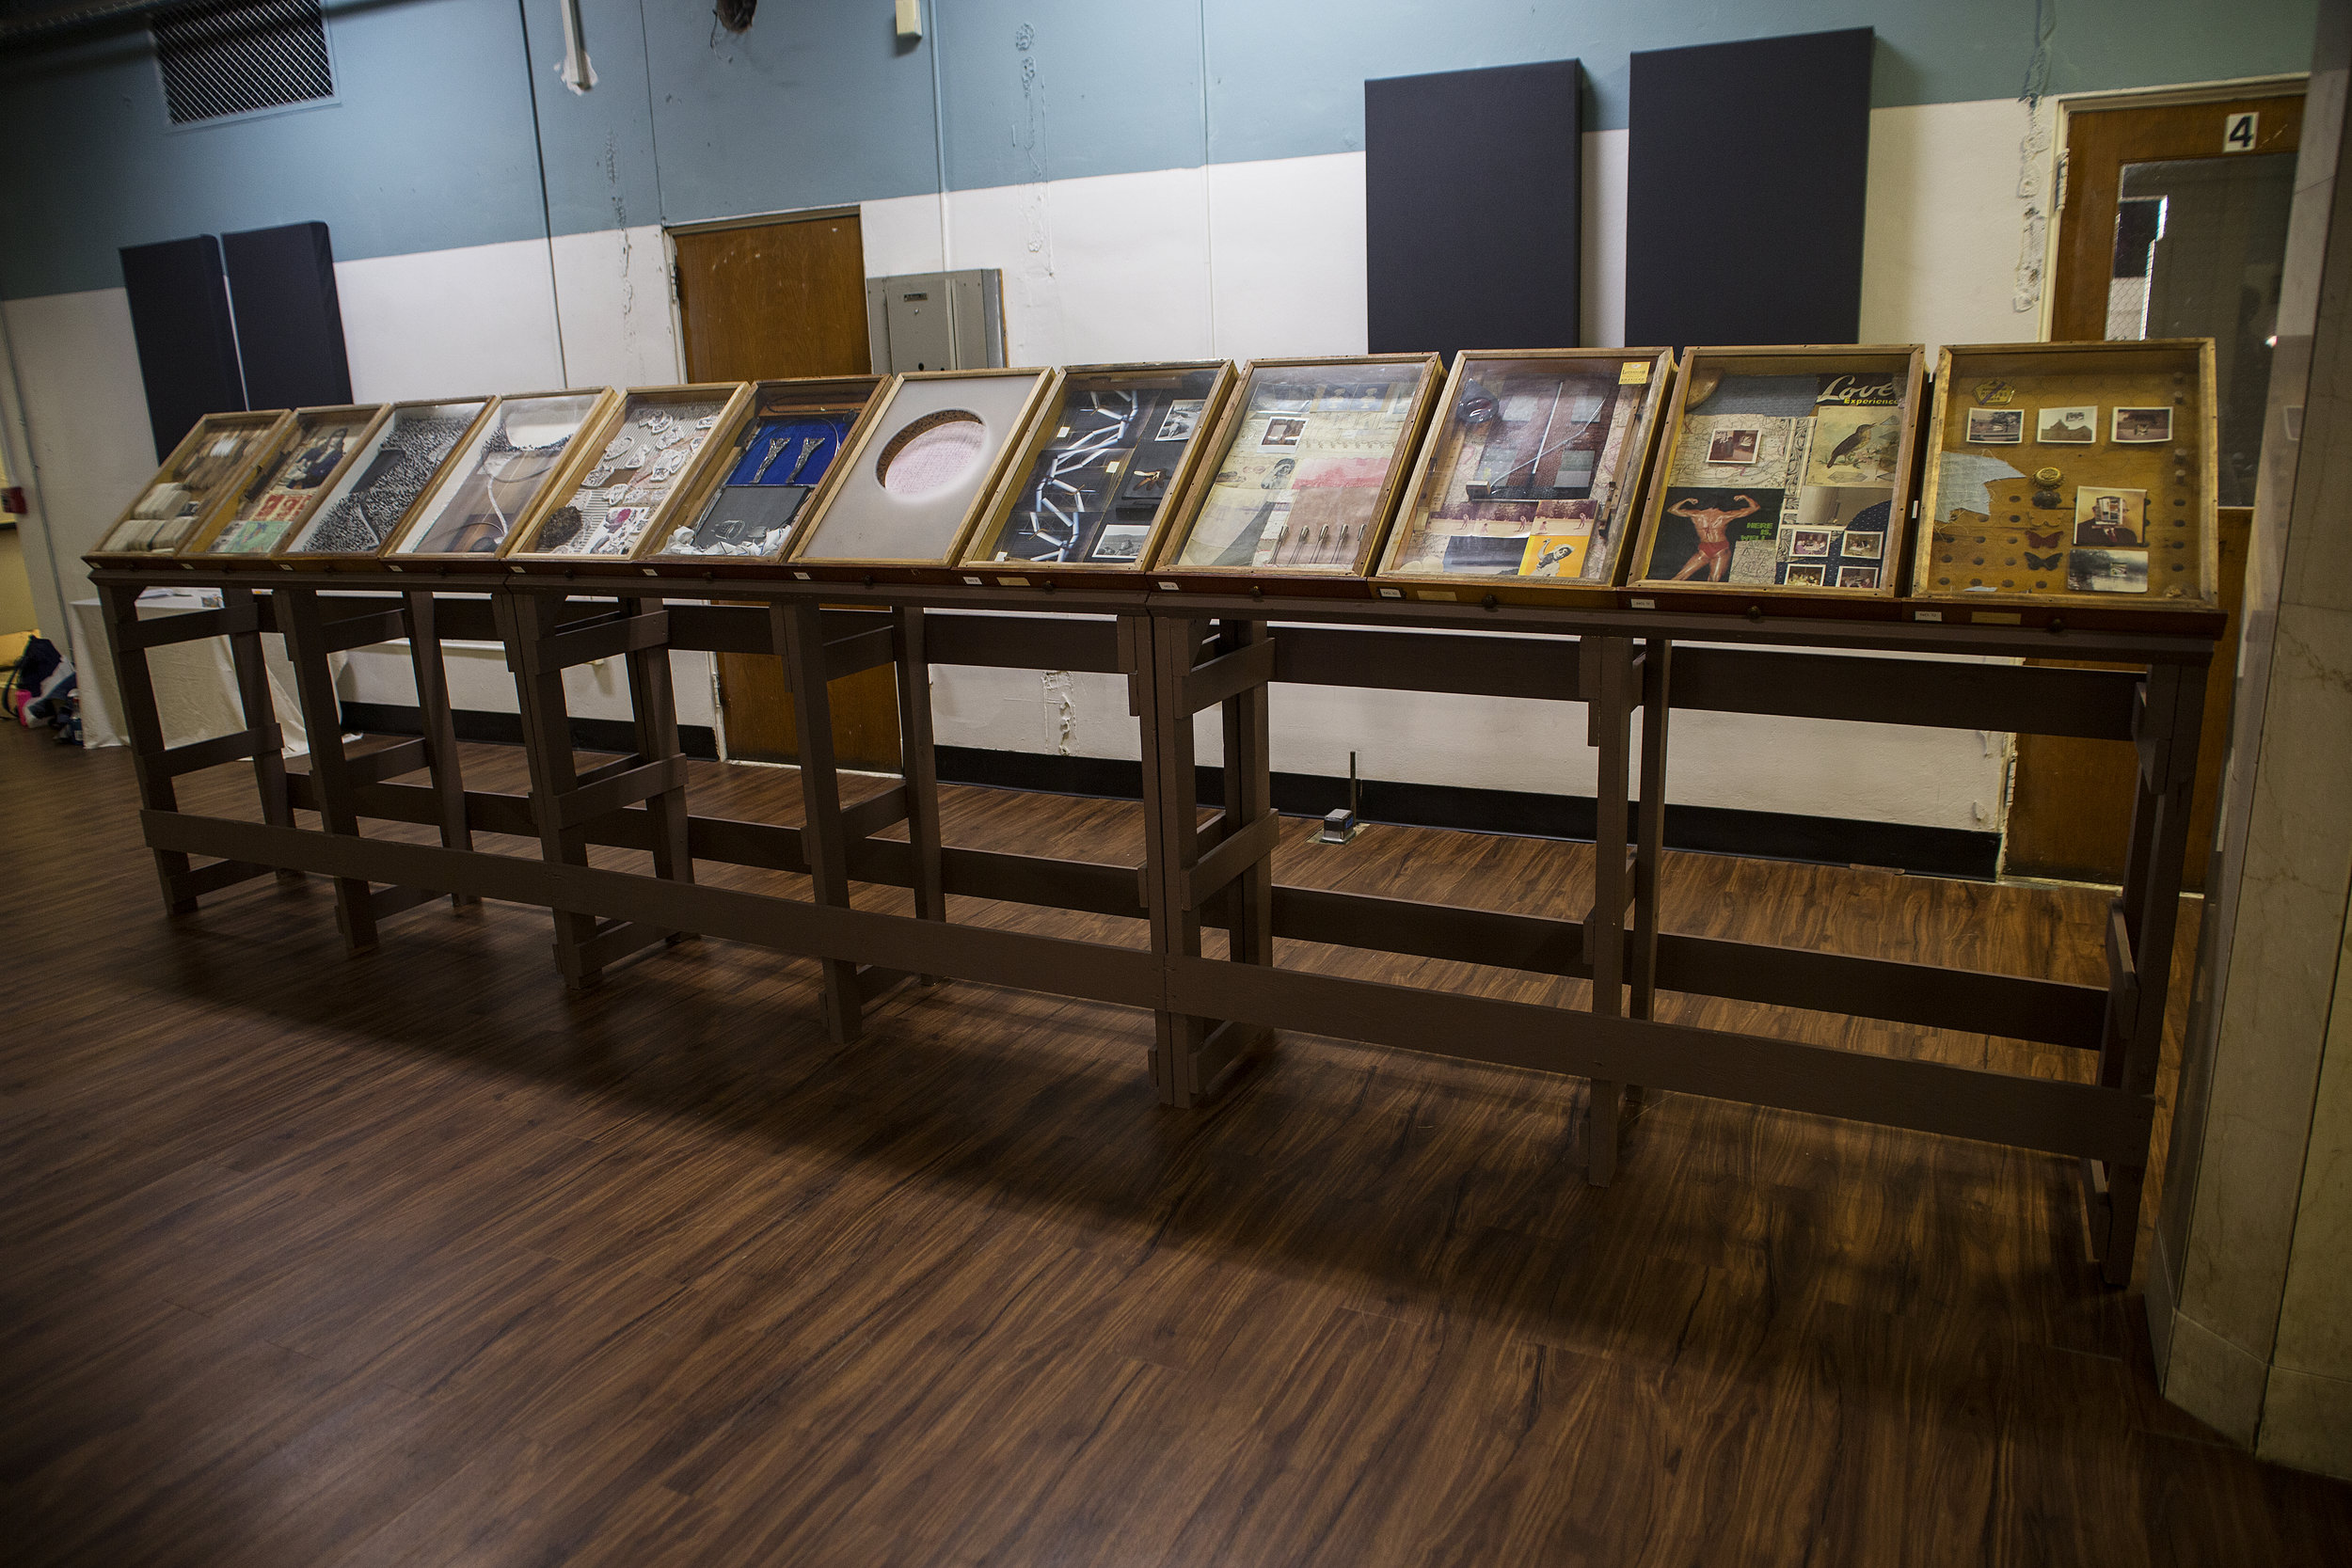  Archive of 12 specimen boxes on stands, 18 linear feet. 